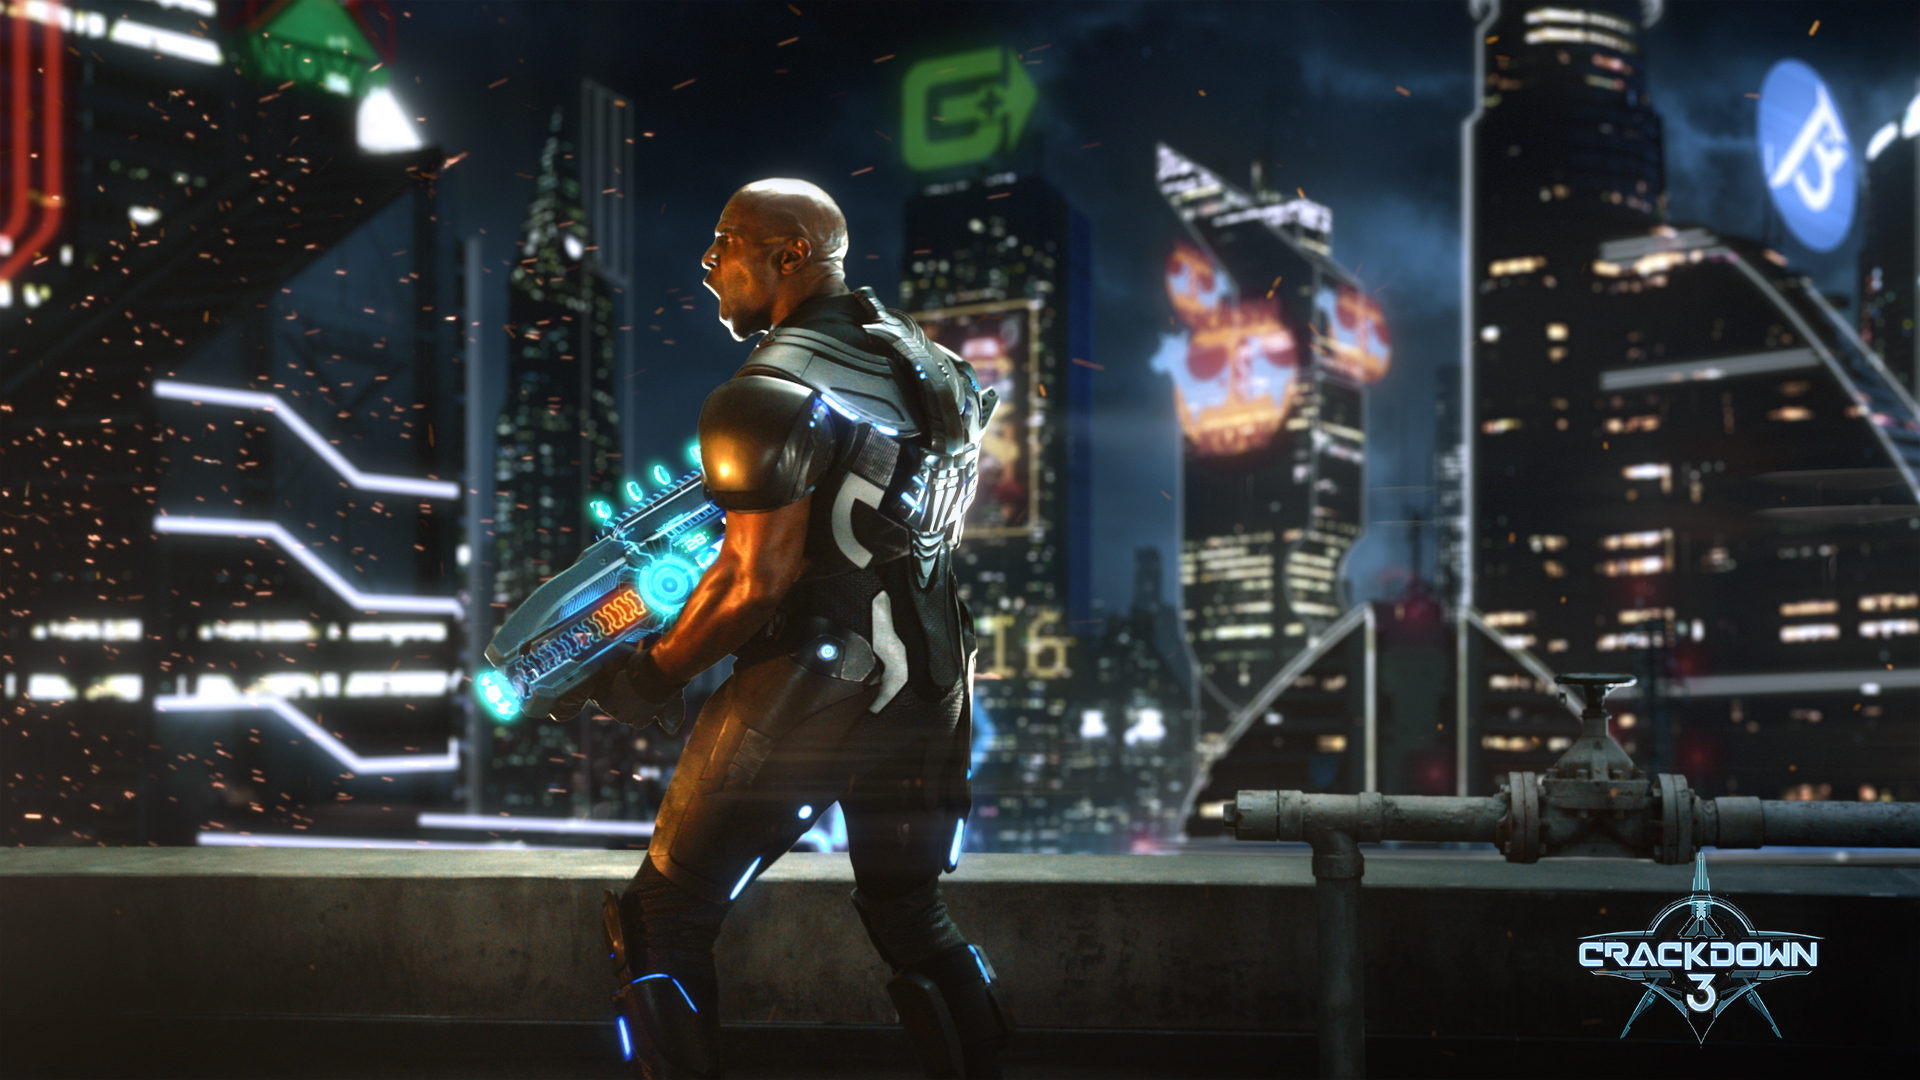 crackdown 3 playable characters